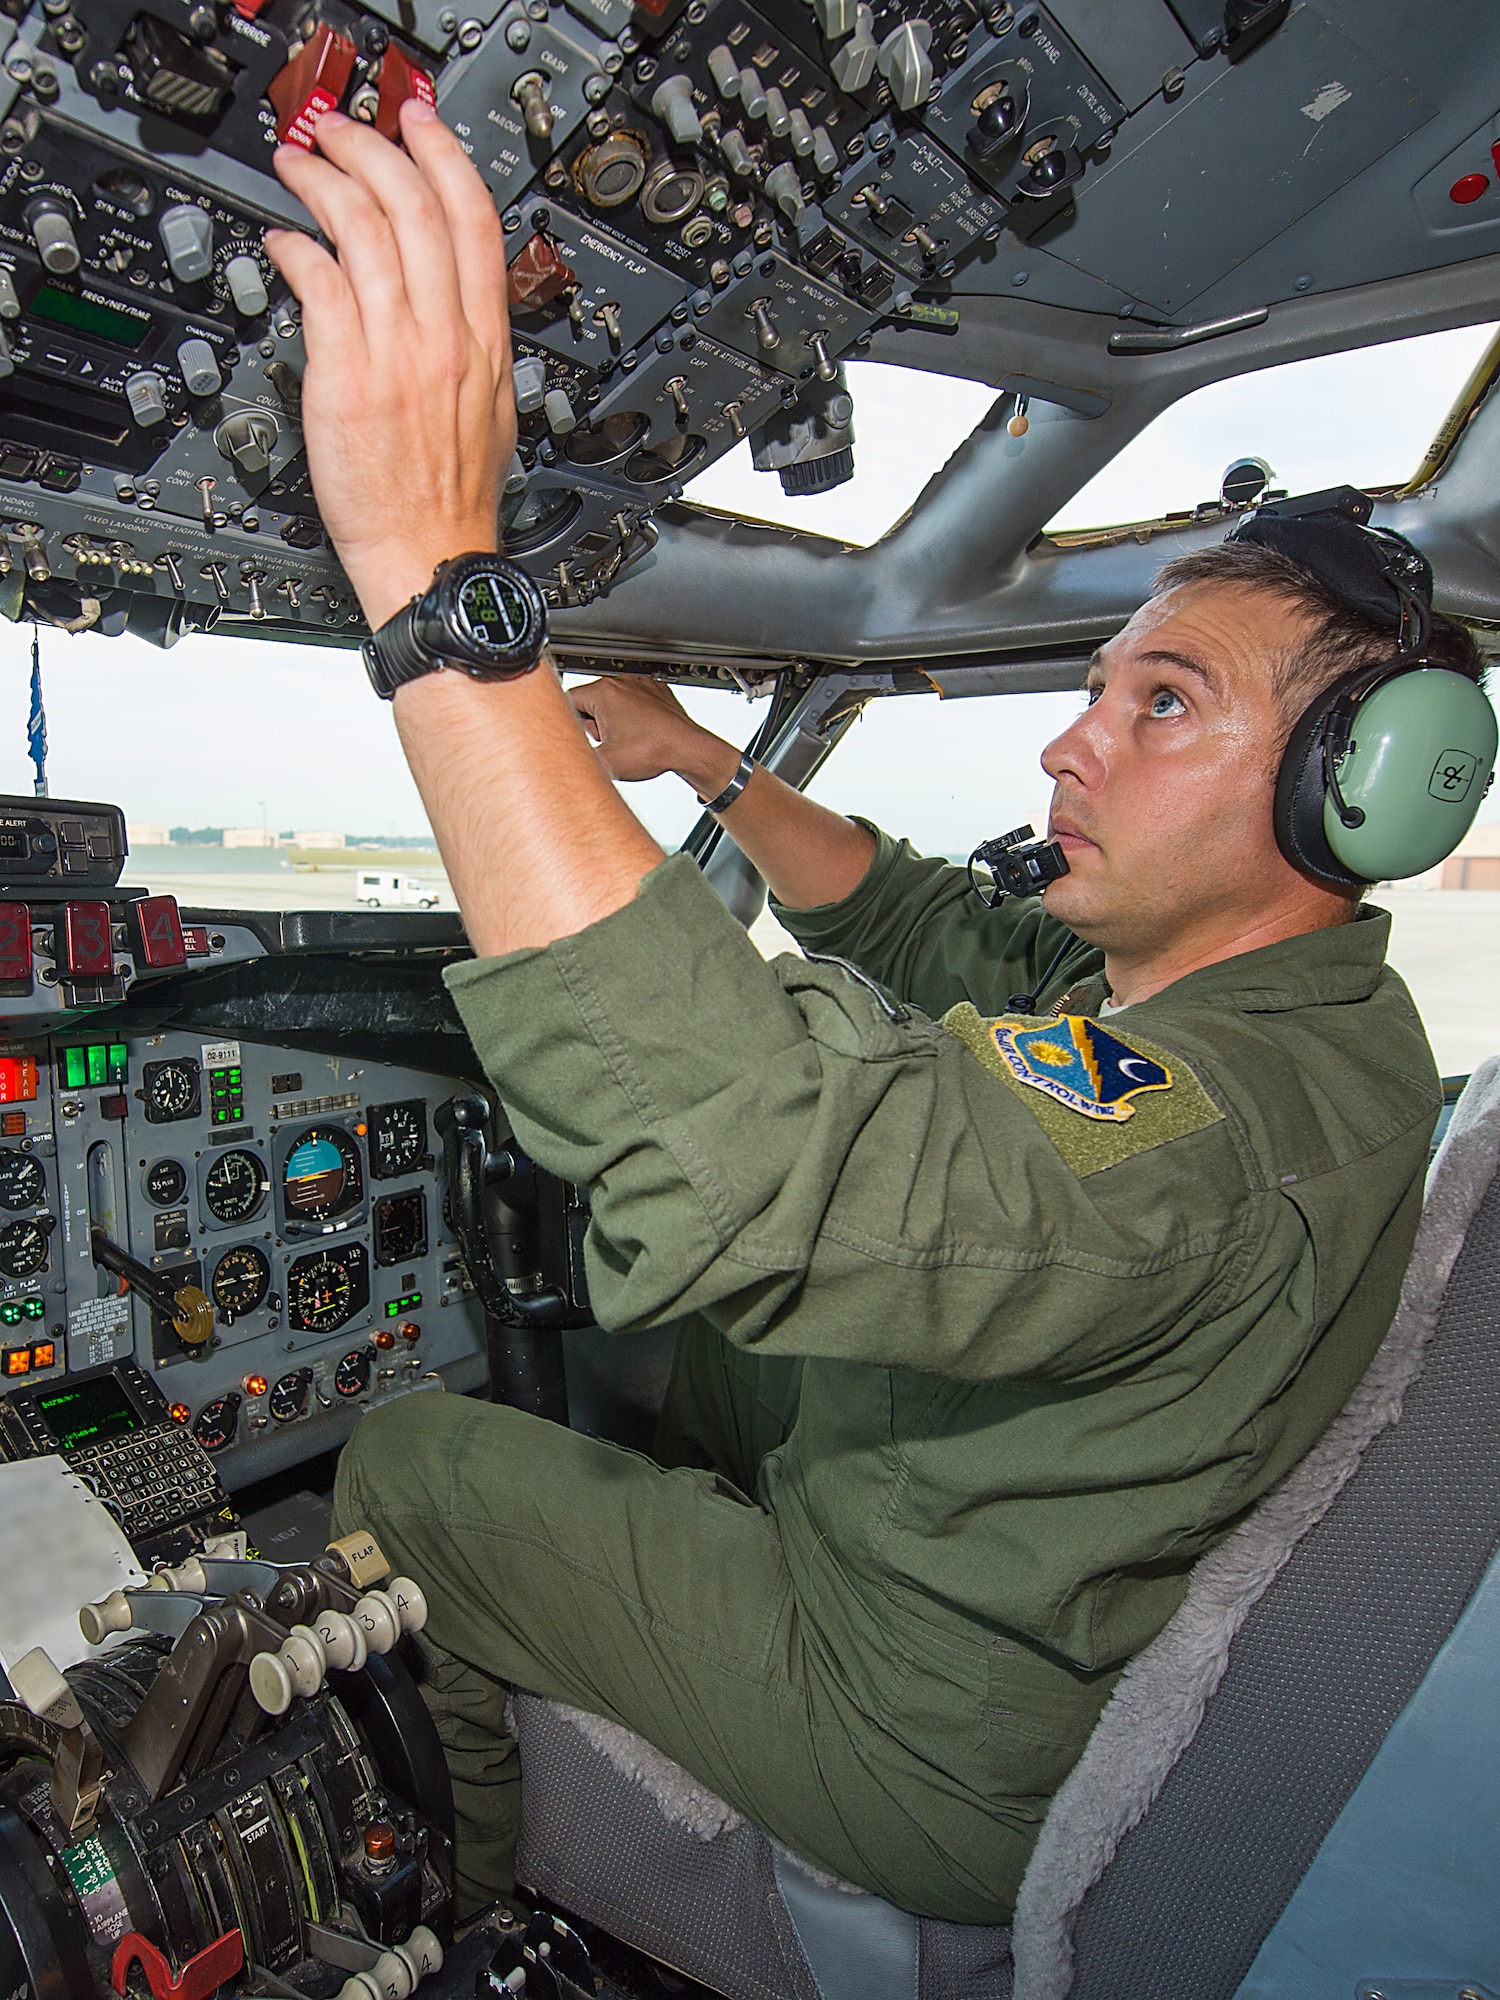 U.S. Air Force Tech. Sgt. Josh Barker, a flight engineer with the 12th Airborne Command and Control Squadron, performs a pre-flight on an E-8C Joint STARS in preparation for a mission during the Northern Strike 2015 combat exercise, Robins Air Force Base, Ga., July 29, 2015. Team JSTARS joined military forces from more than 20 states and four coalition countries for the exercise hosted by the Michigan National Guard. Working with a liaison officer from the 116th Air Control Wing (ACW), Georgia Air National Guard, deployed to the exercise headquarters in Michigan, aircrews flying out of Robins Air Force Base from the 461st ACW and the Army  JSTARS provided real-time tracking information to air and ground forces helping them to find and identify enemy forces played by exercise participants. (U.S. Air National Guard photo by Senior Master Sgt. Roger Parsons/Released) (Portions of the photo have been blurred for security purposes)

